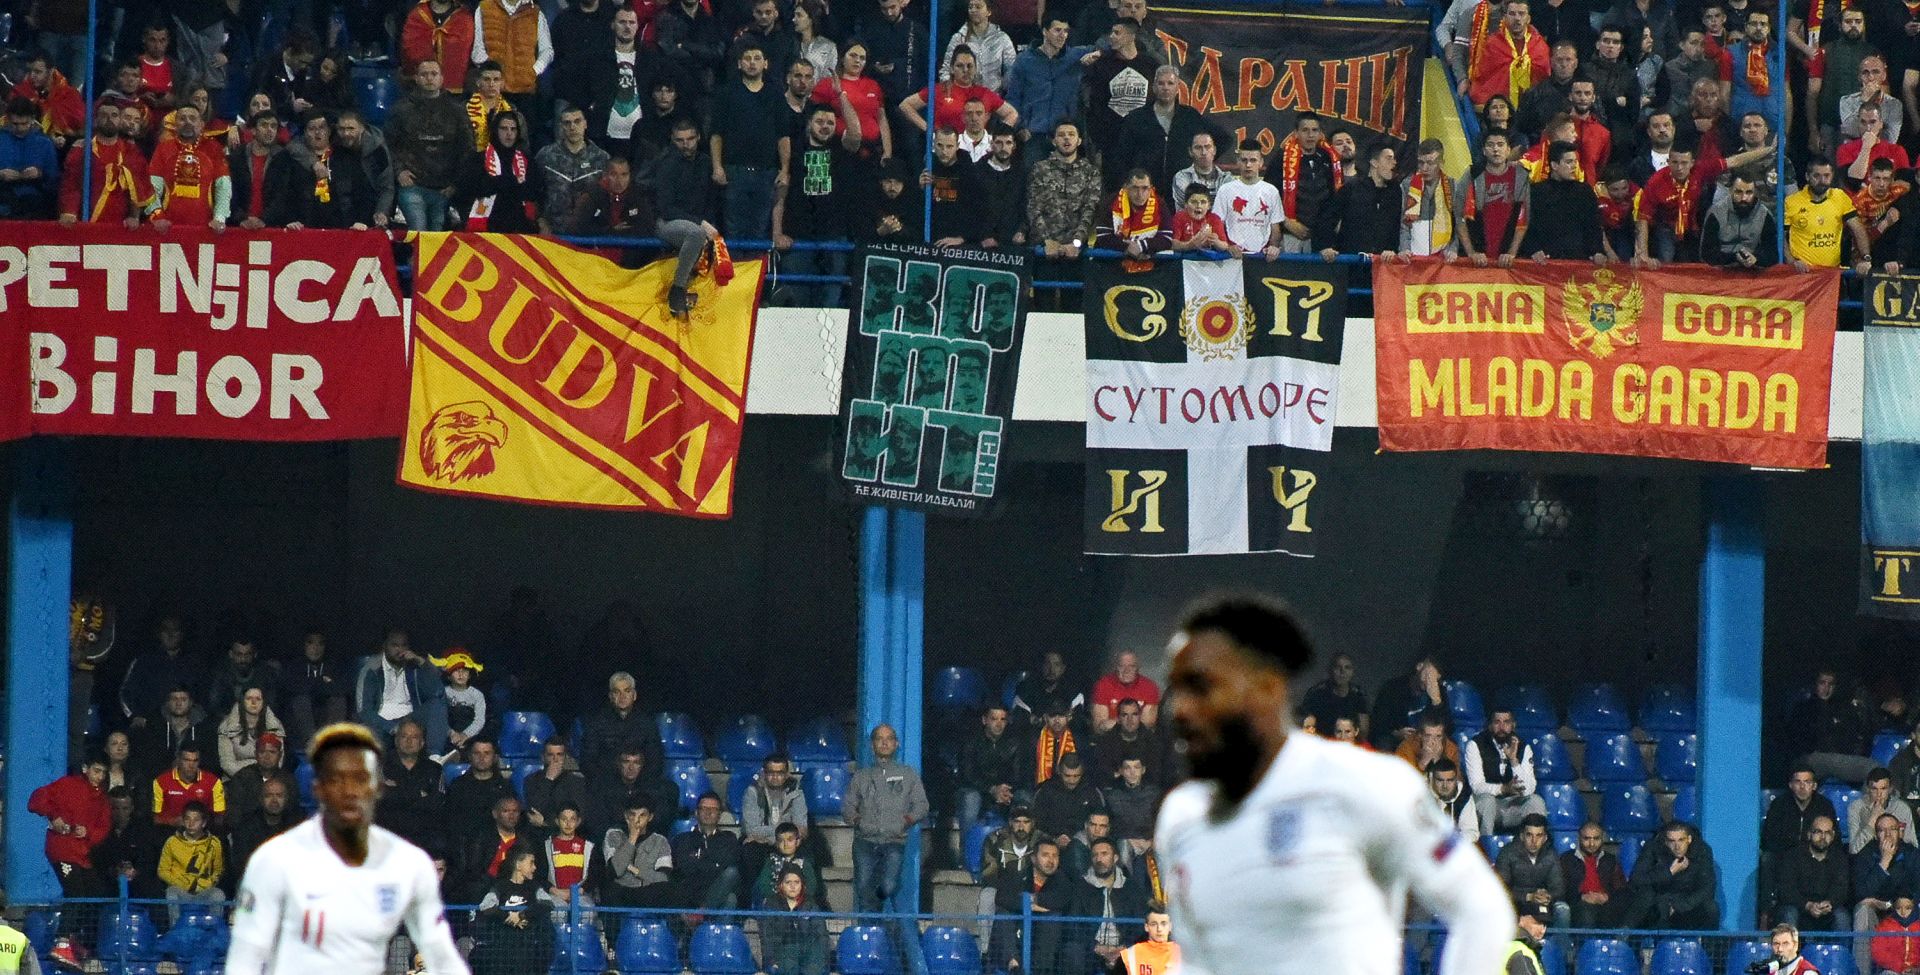 epa07464212 Montenegro supporters attend the UEFA EURO 2020 qualifying soccer match between Montenegro and England in Podgorica, Montenegro, 25 March 2019 (issued 26 March 2019). The UEFA is set to launch an investigation on racist chanting against England players during the match, after a formal complaint was lodged by England following their 5-1 win in Podgorica, reports claimed on 26 March 2019.  EPA/BORIS PEJOVIC